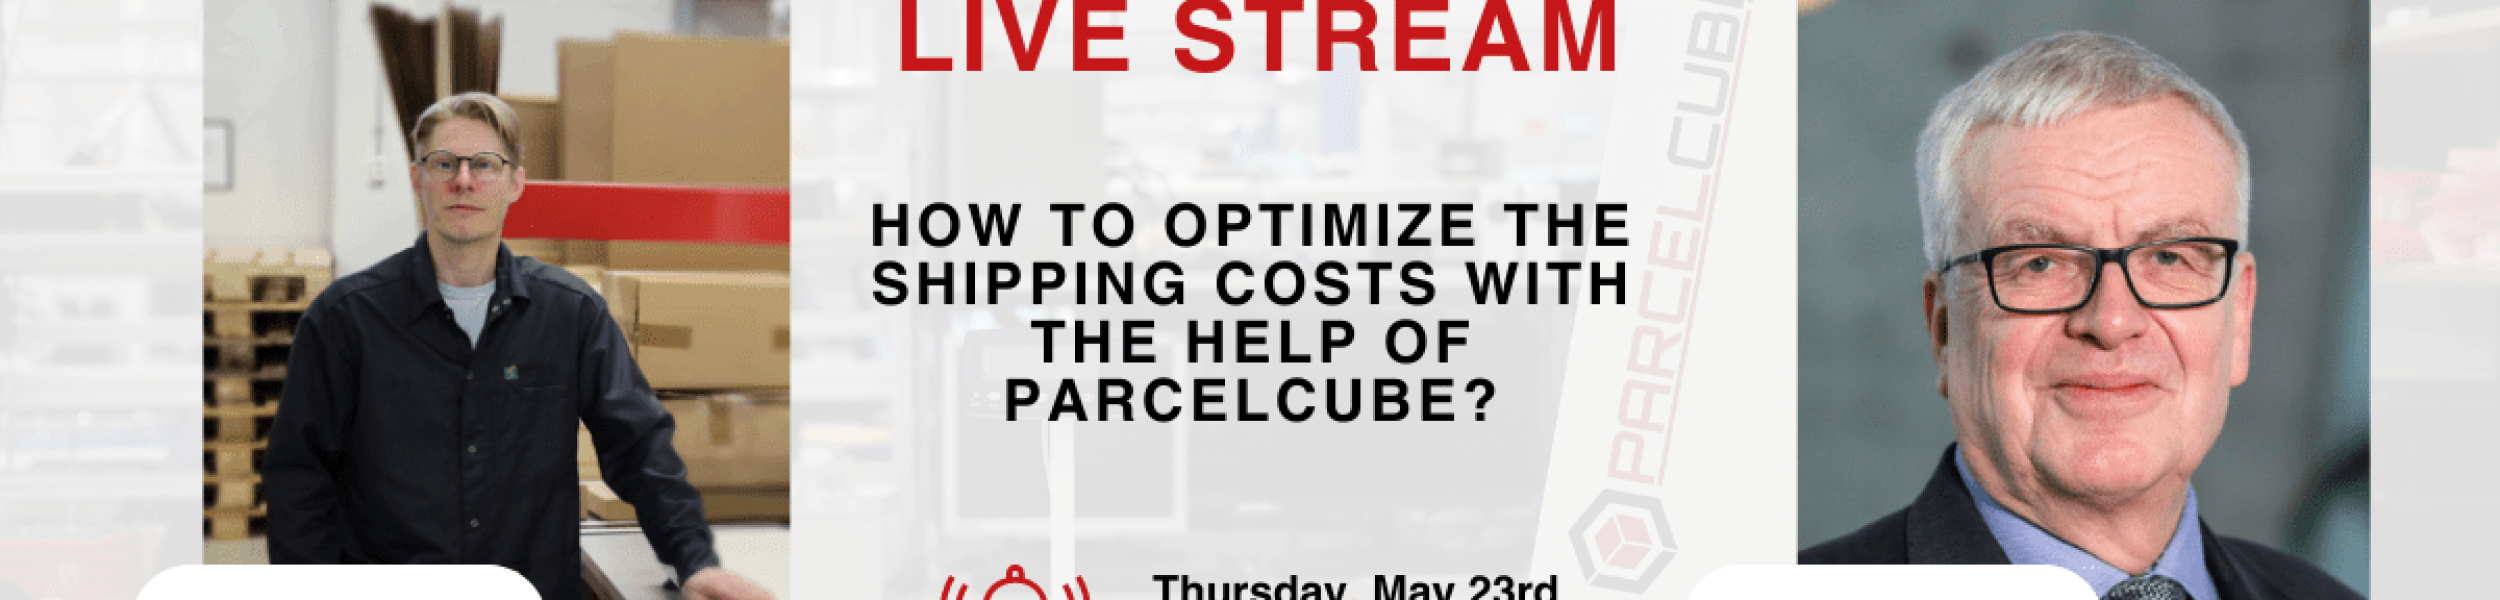 LinkedIn Live session: How to optimize the shipping costs with the help of Parcelcube?